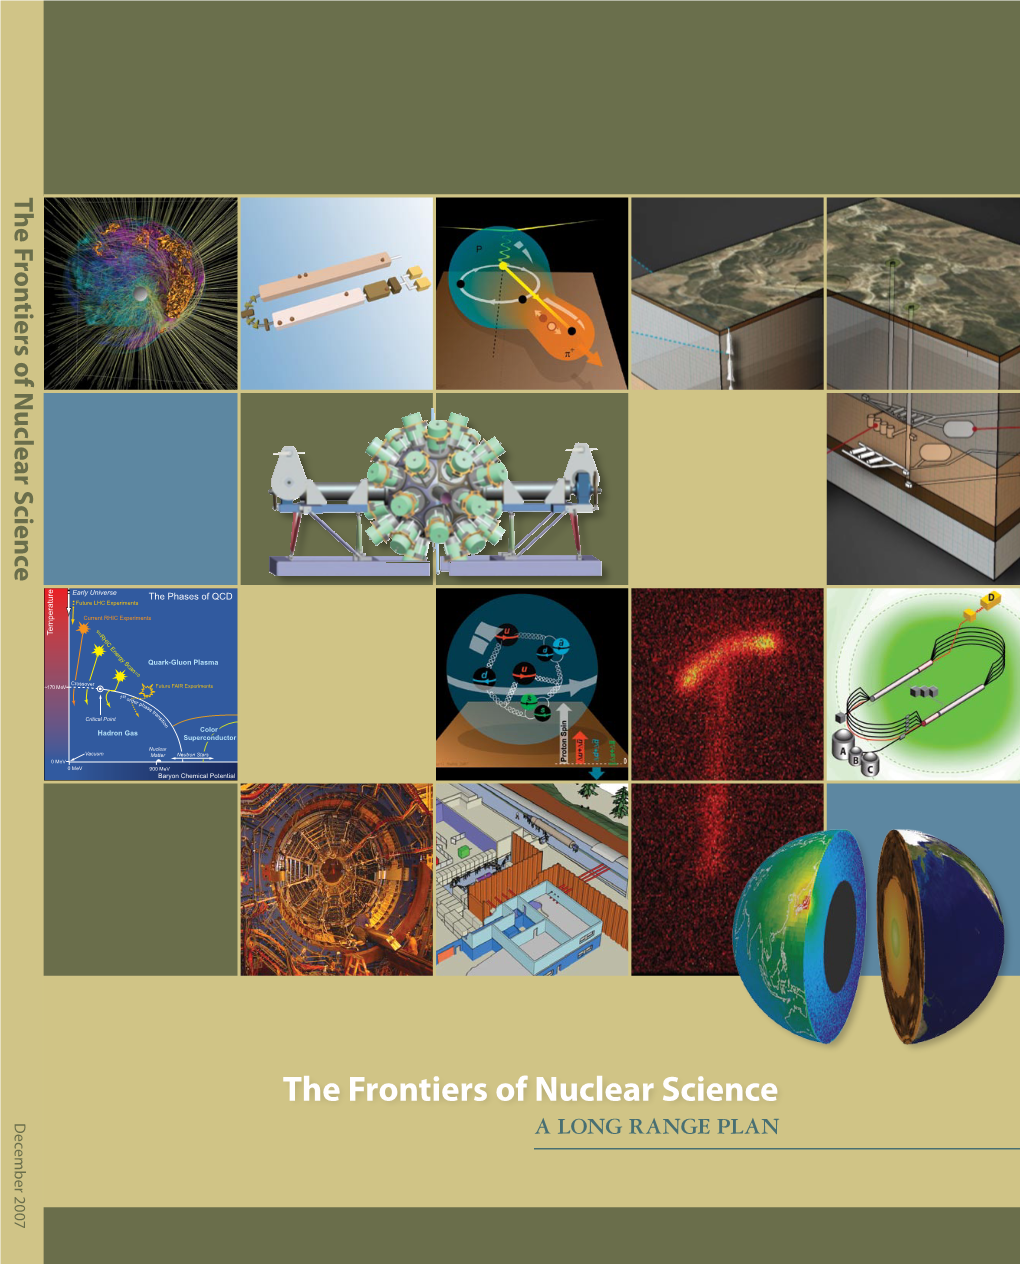 The Frontiers of Nuclear Science